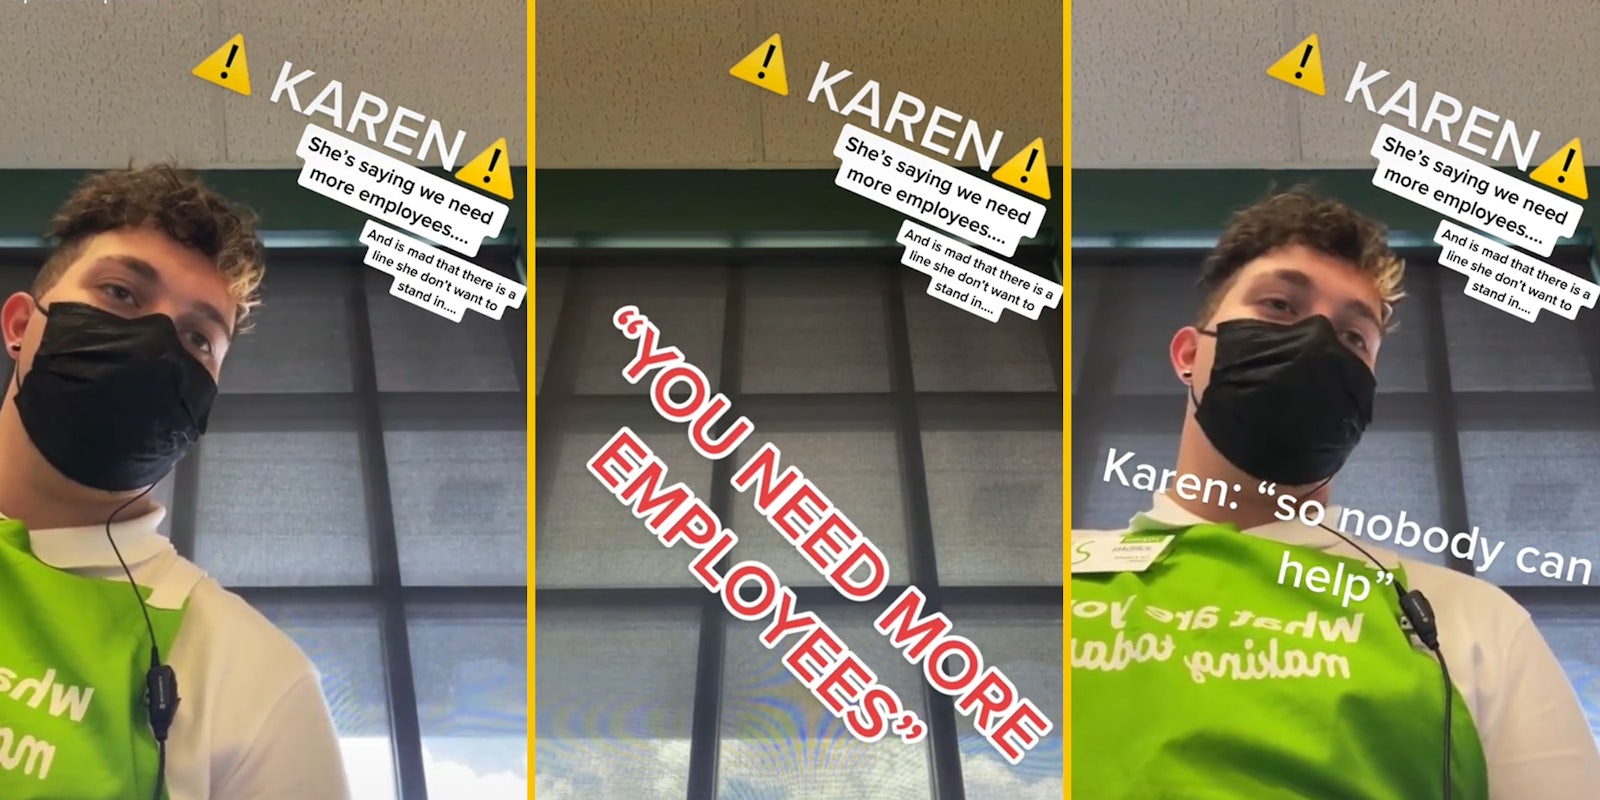 young man behind counter with mask and caption 'Karen - she's saying we need more employees... and is mad that there is a line she don't want to stand in...' (l) 'You need more employees' (c) Karen: 'so nobody can help' (r)